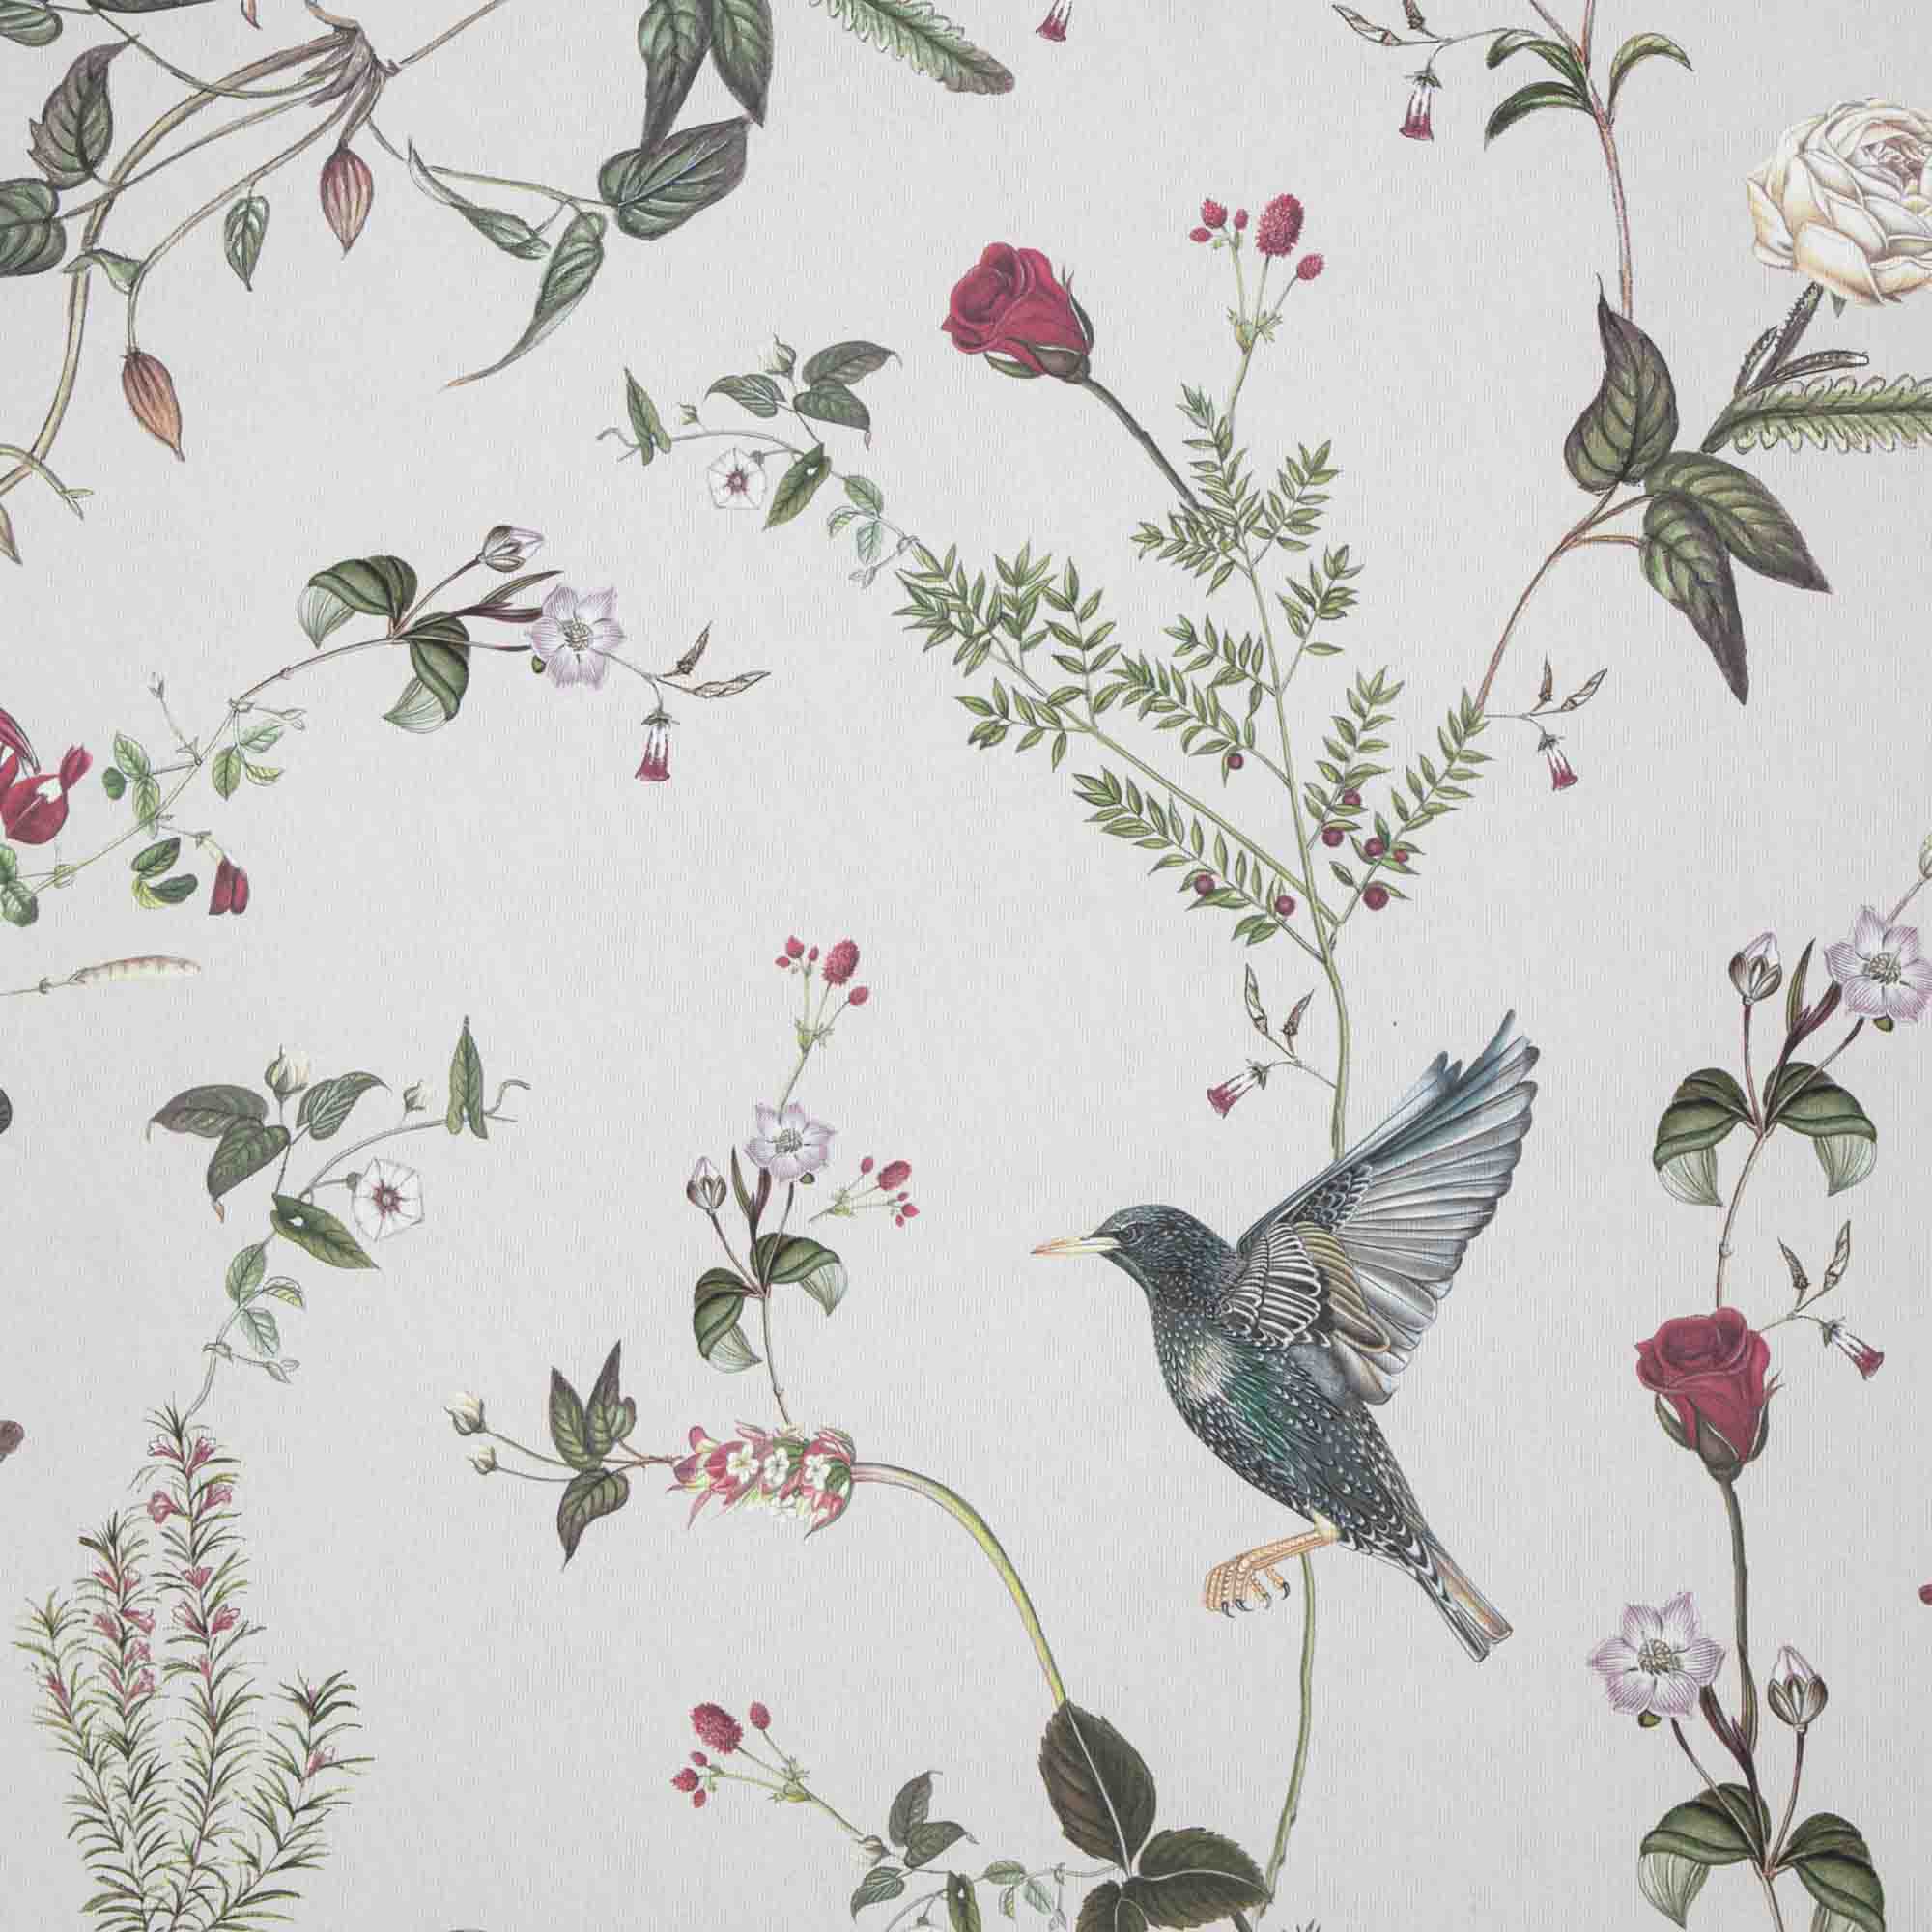 Starlings at the Rose Garden Day - Wallpaper Swatch 18cm x 25cm